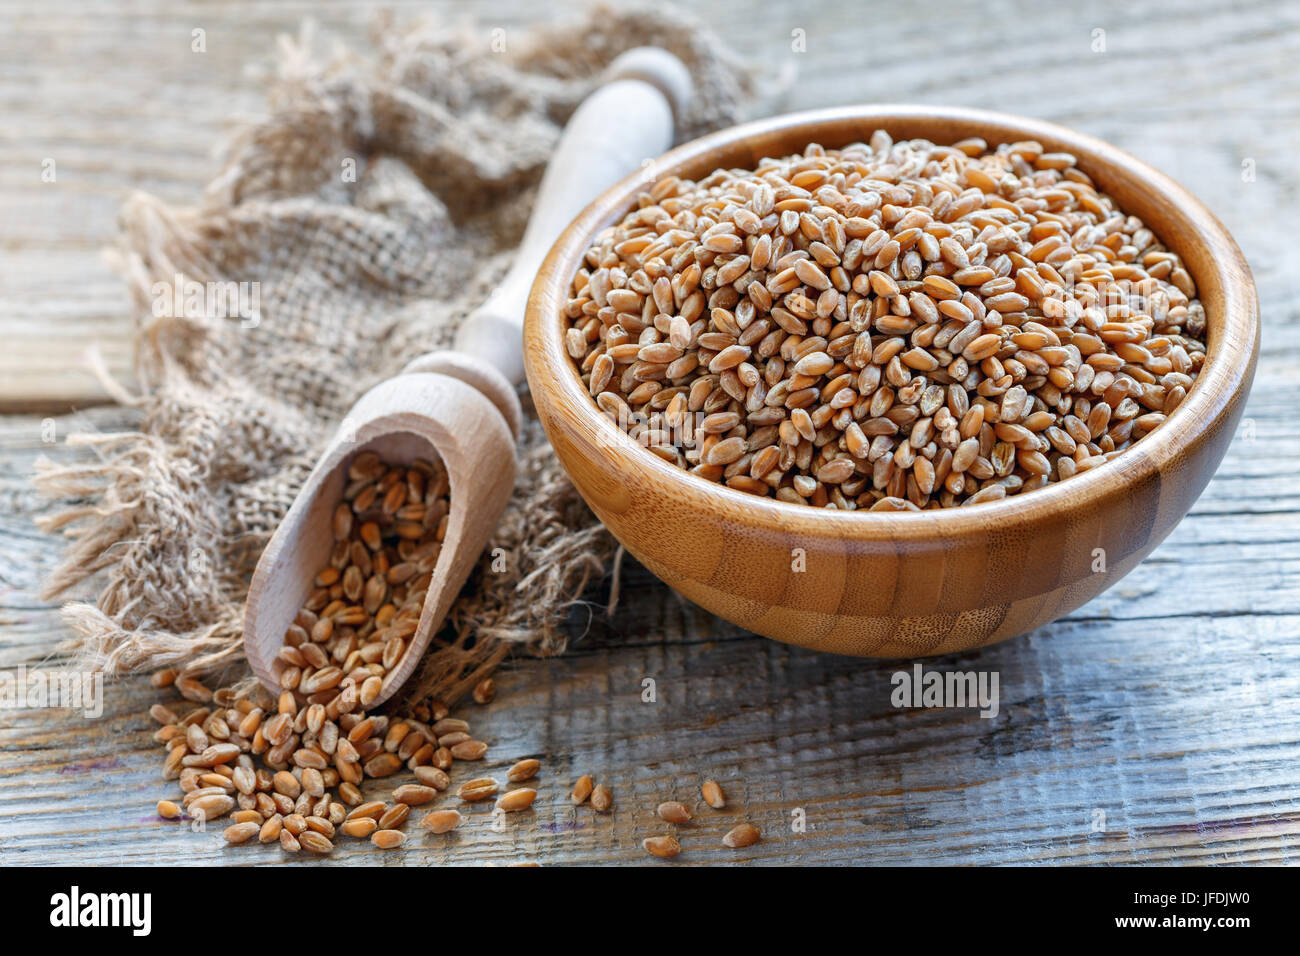 Wooden bowl and scoop wheat. Stock Photo